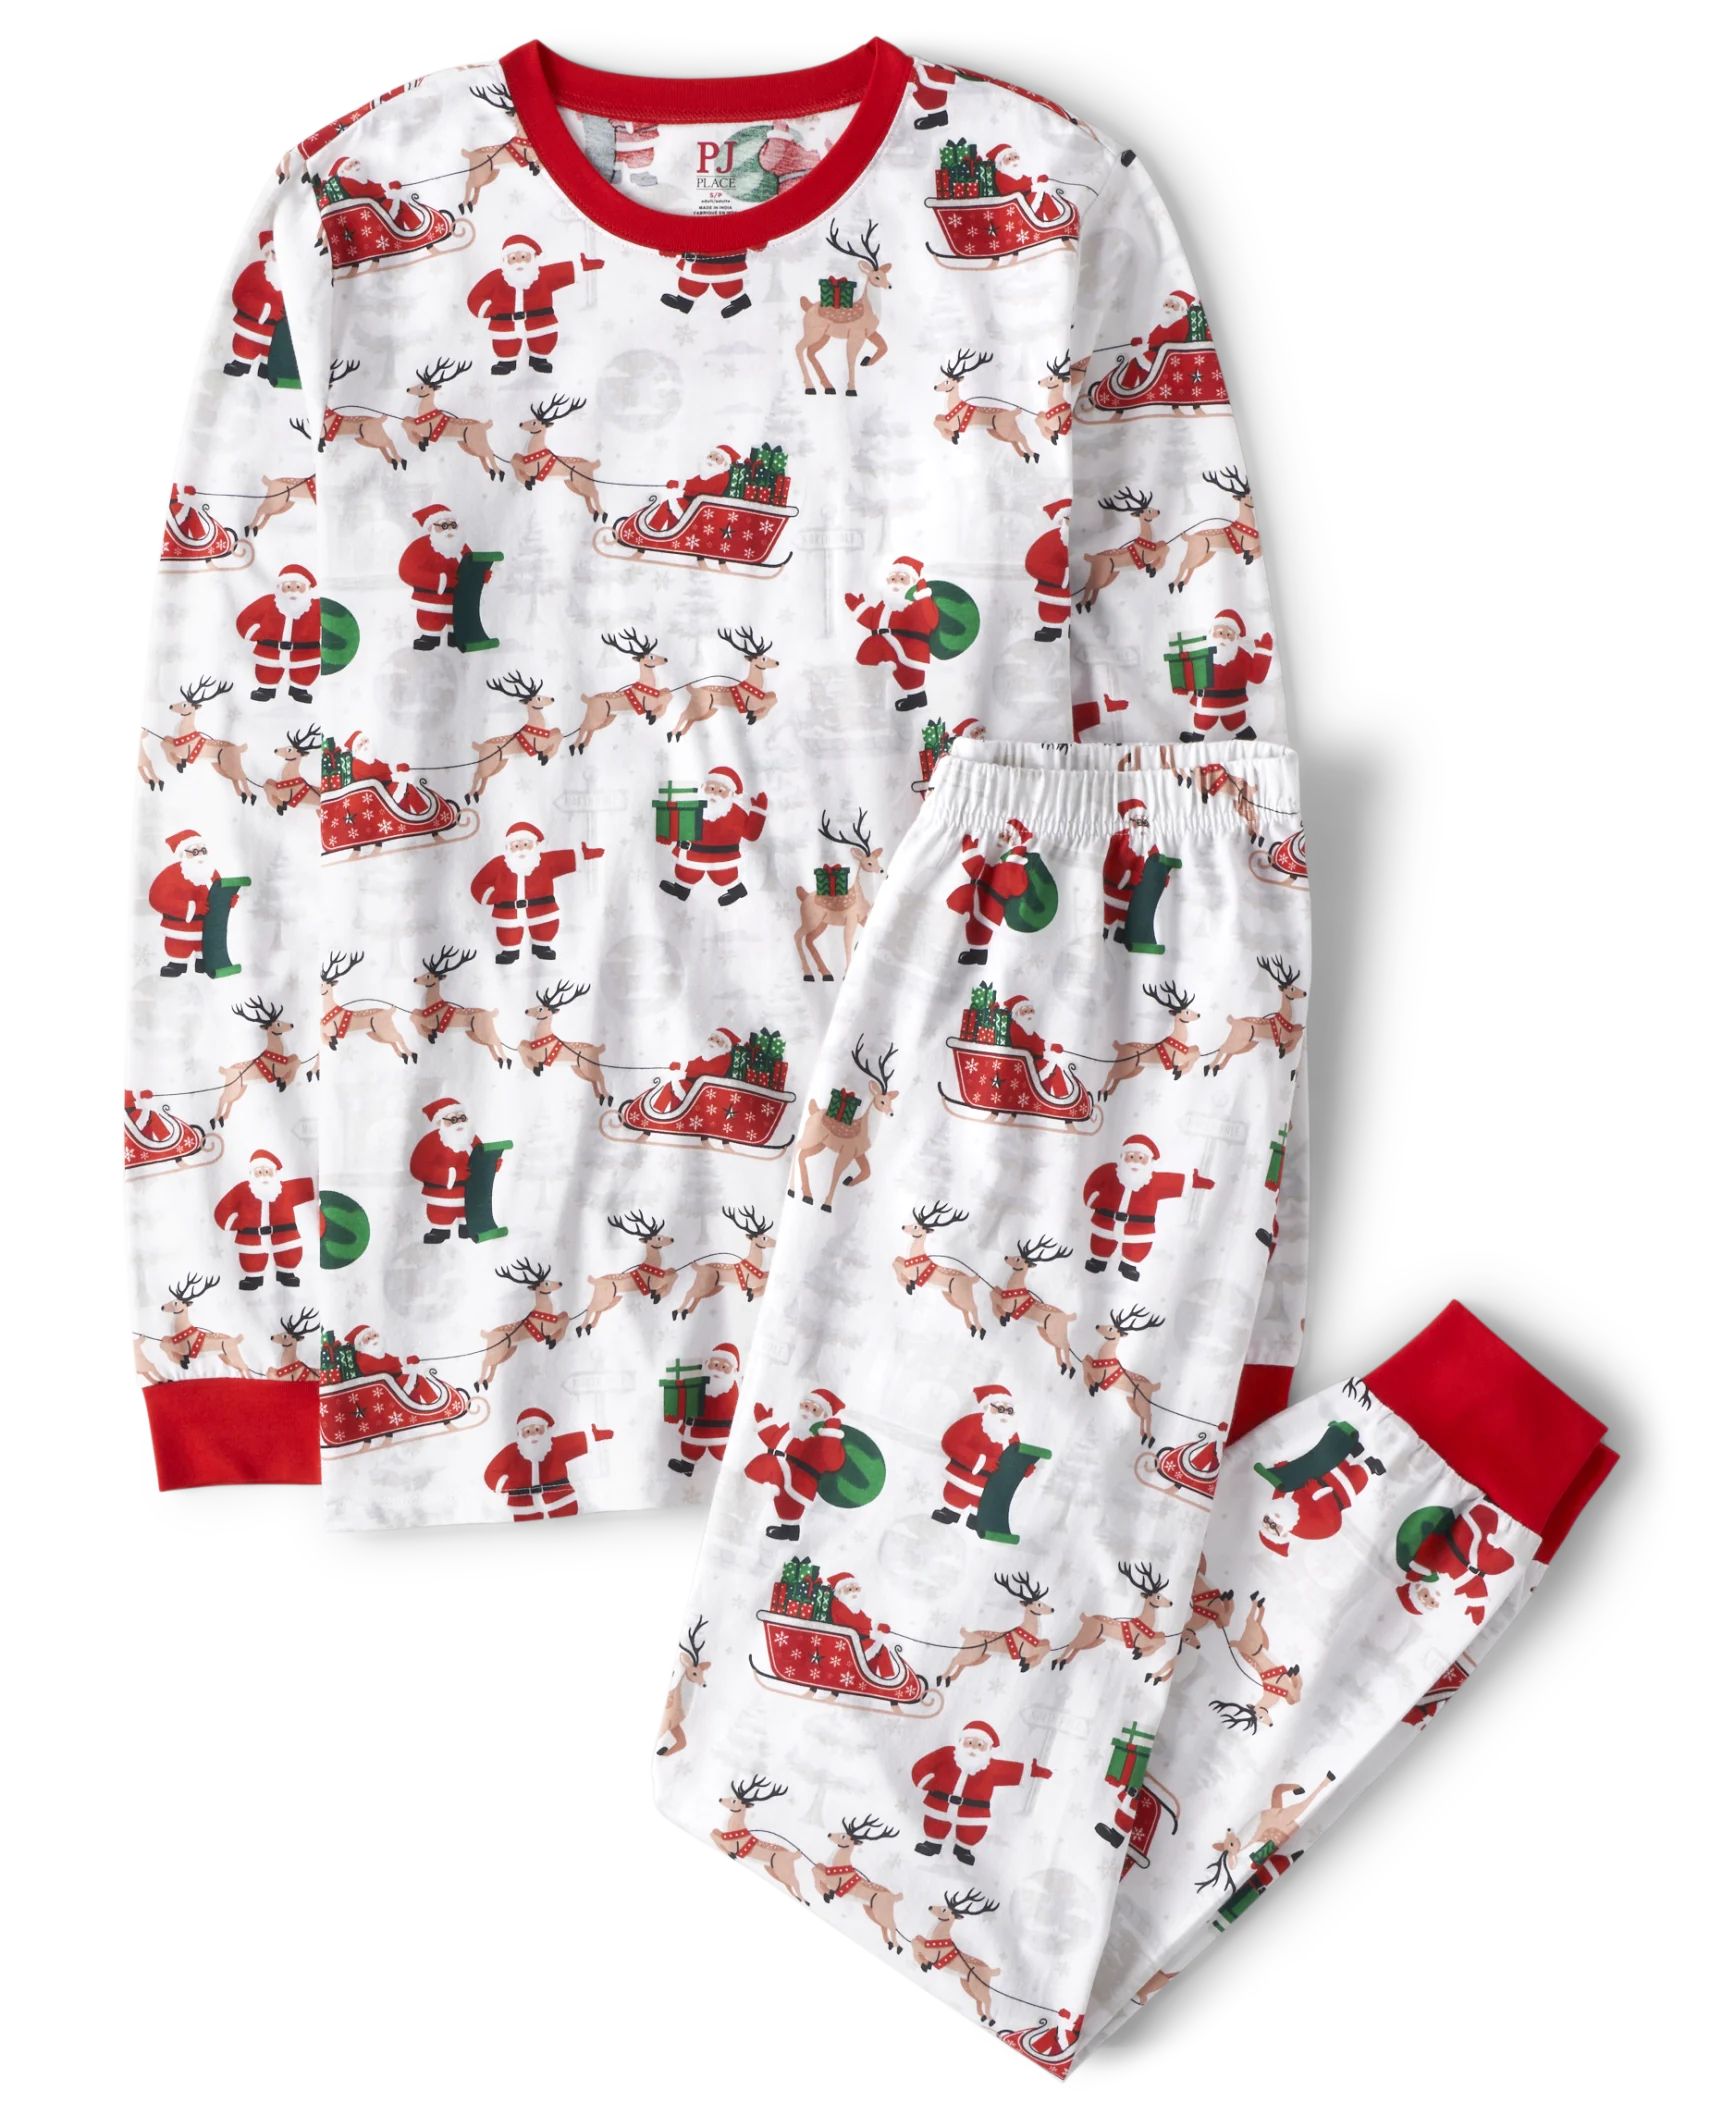 Unisex Adult Matching Family Santa Reindeer Cotton Pajamas - white | The Children's Place